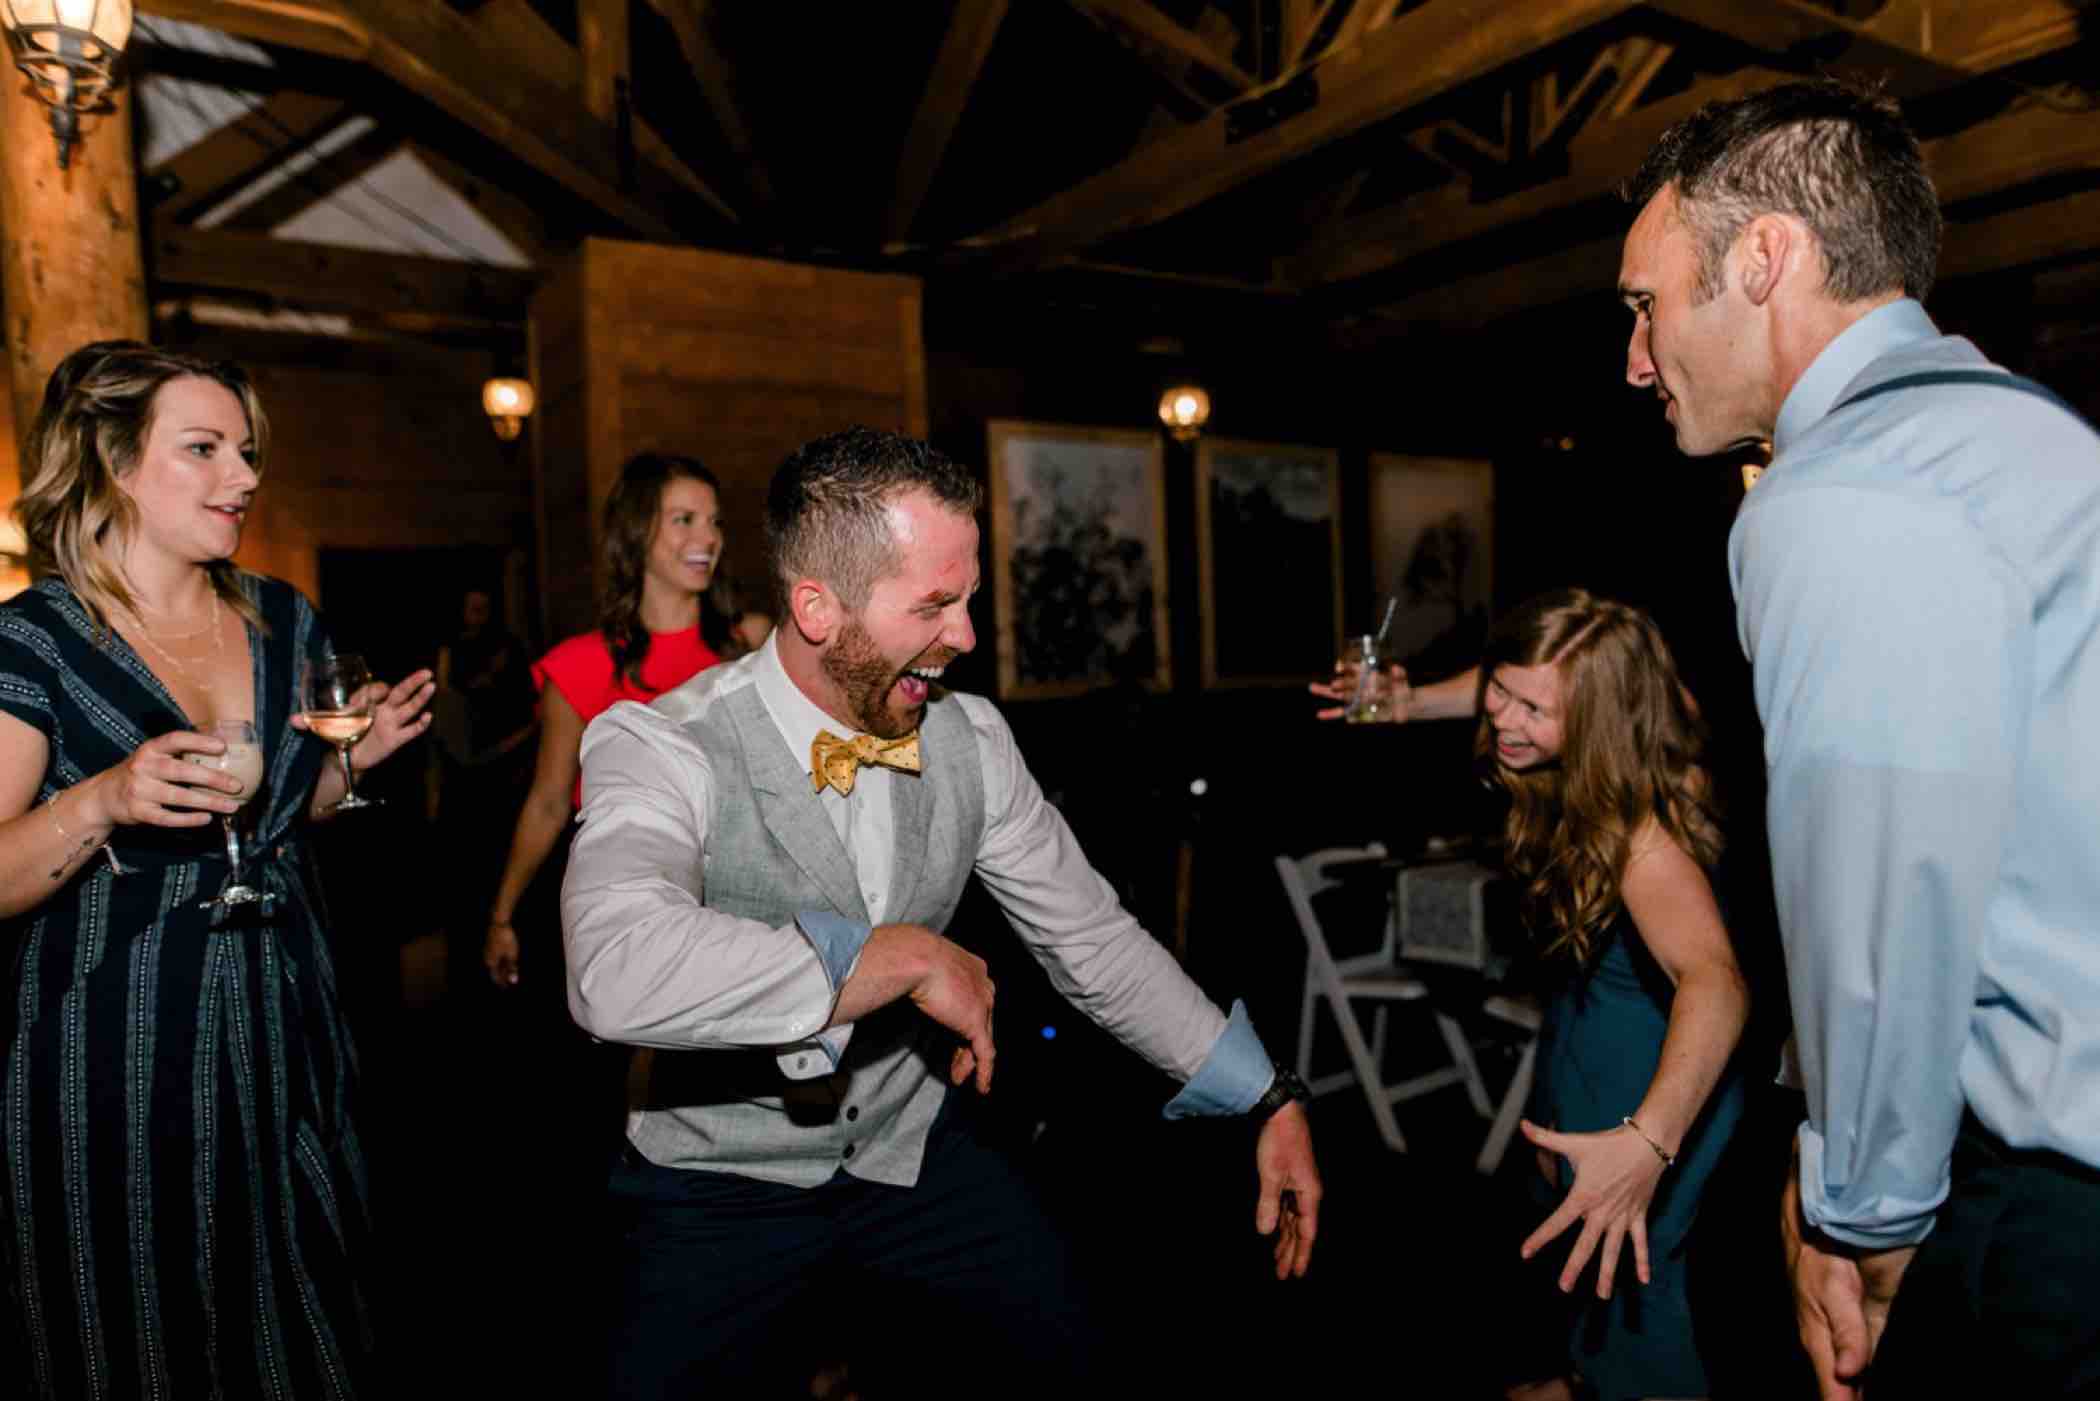 The groom dances with guests at their wedding reception at Piney River Ranch in the Colorado Rocky Mountains. Photo by Ali and Garrett, Romantic, Adventurous, Nostalgic Wedding Photographers.